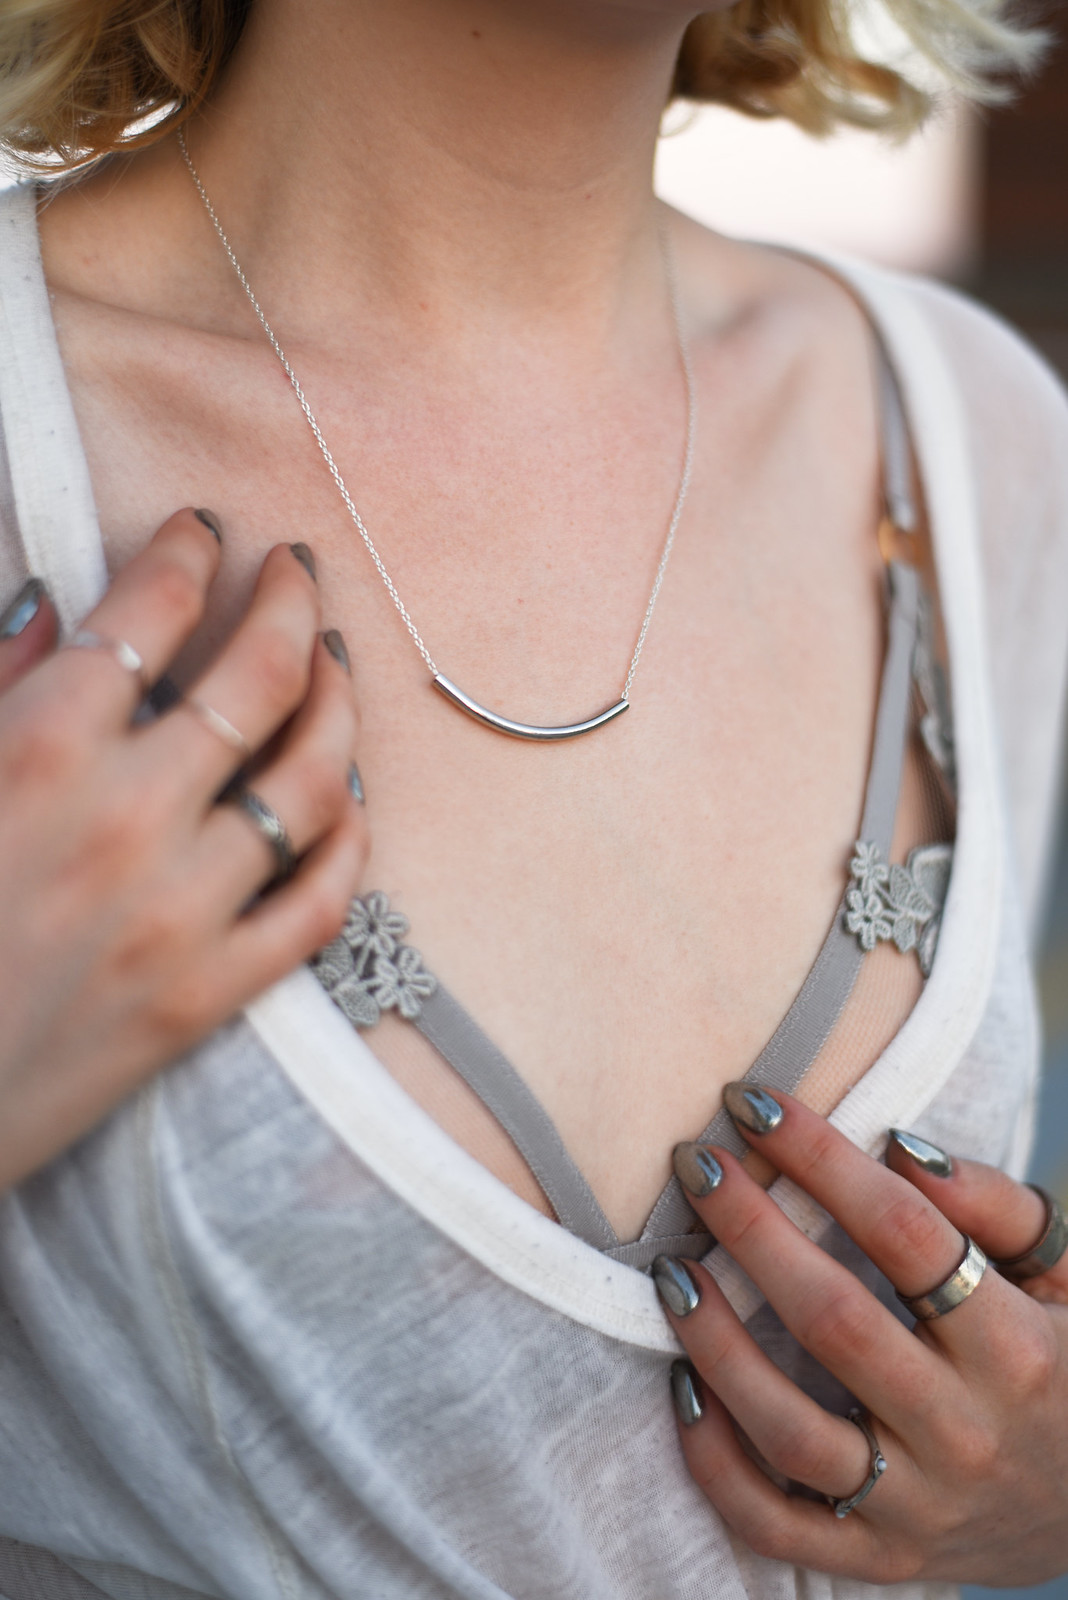 Chrome Nails, Free People Top and rings, Jaelle Necklace, and For Love and Lemons Bra on juliettelaura.blogspot.com